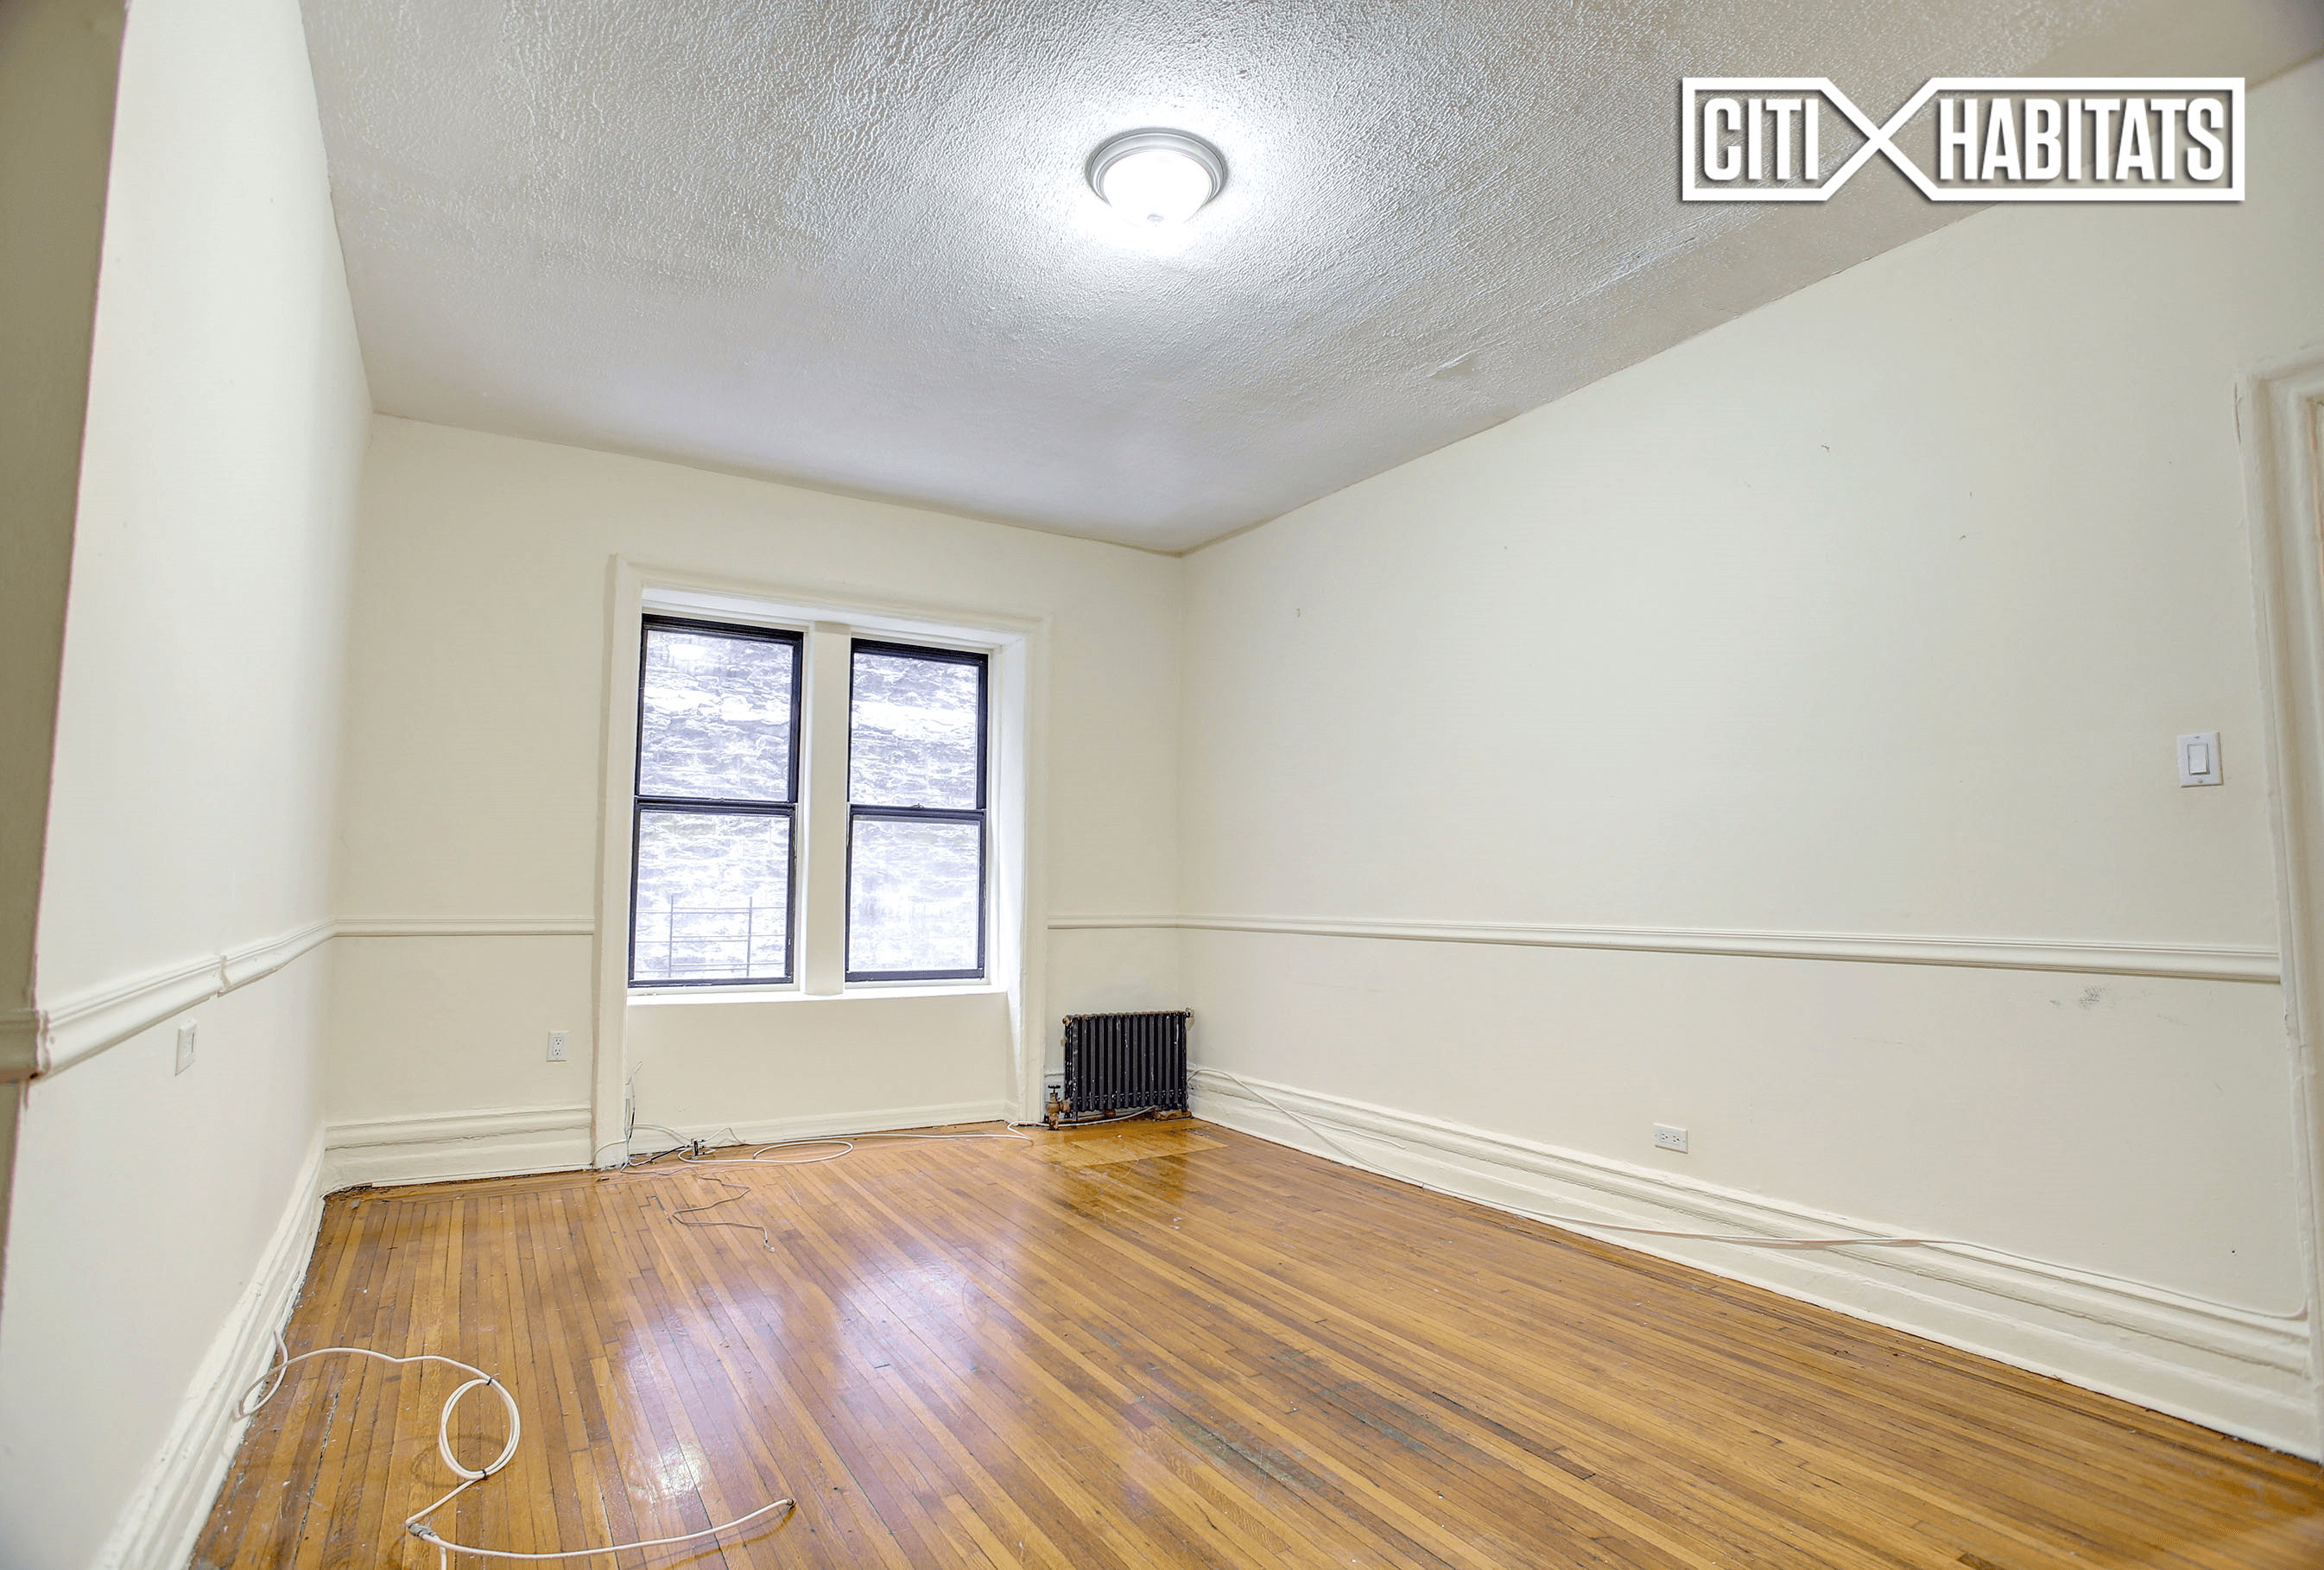 Large two bedroom in a well maintained Washington Heights building on Riverside Drive and West 158th Street.